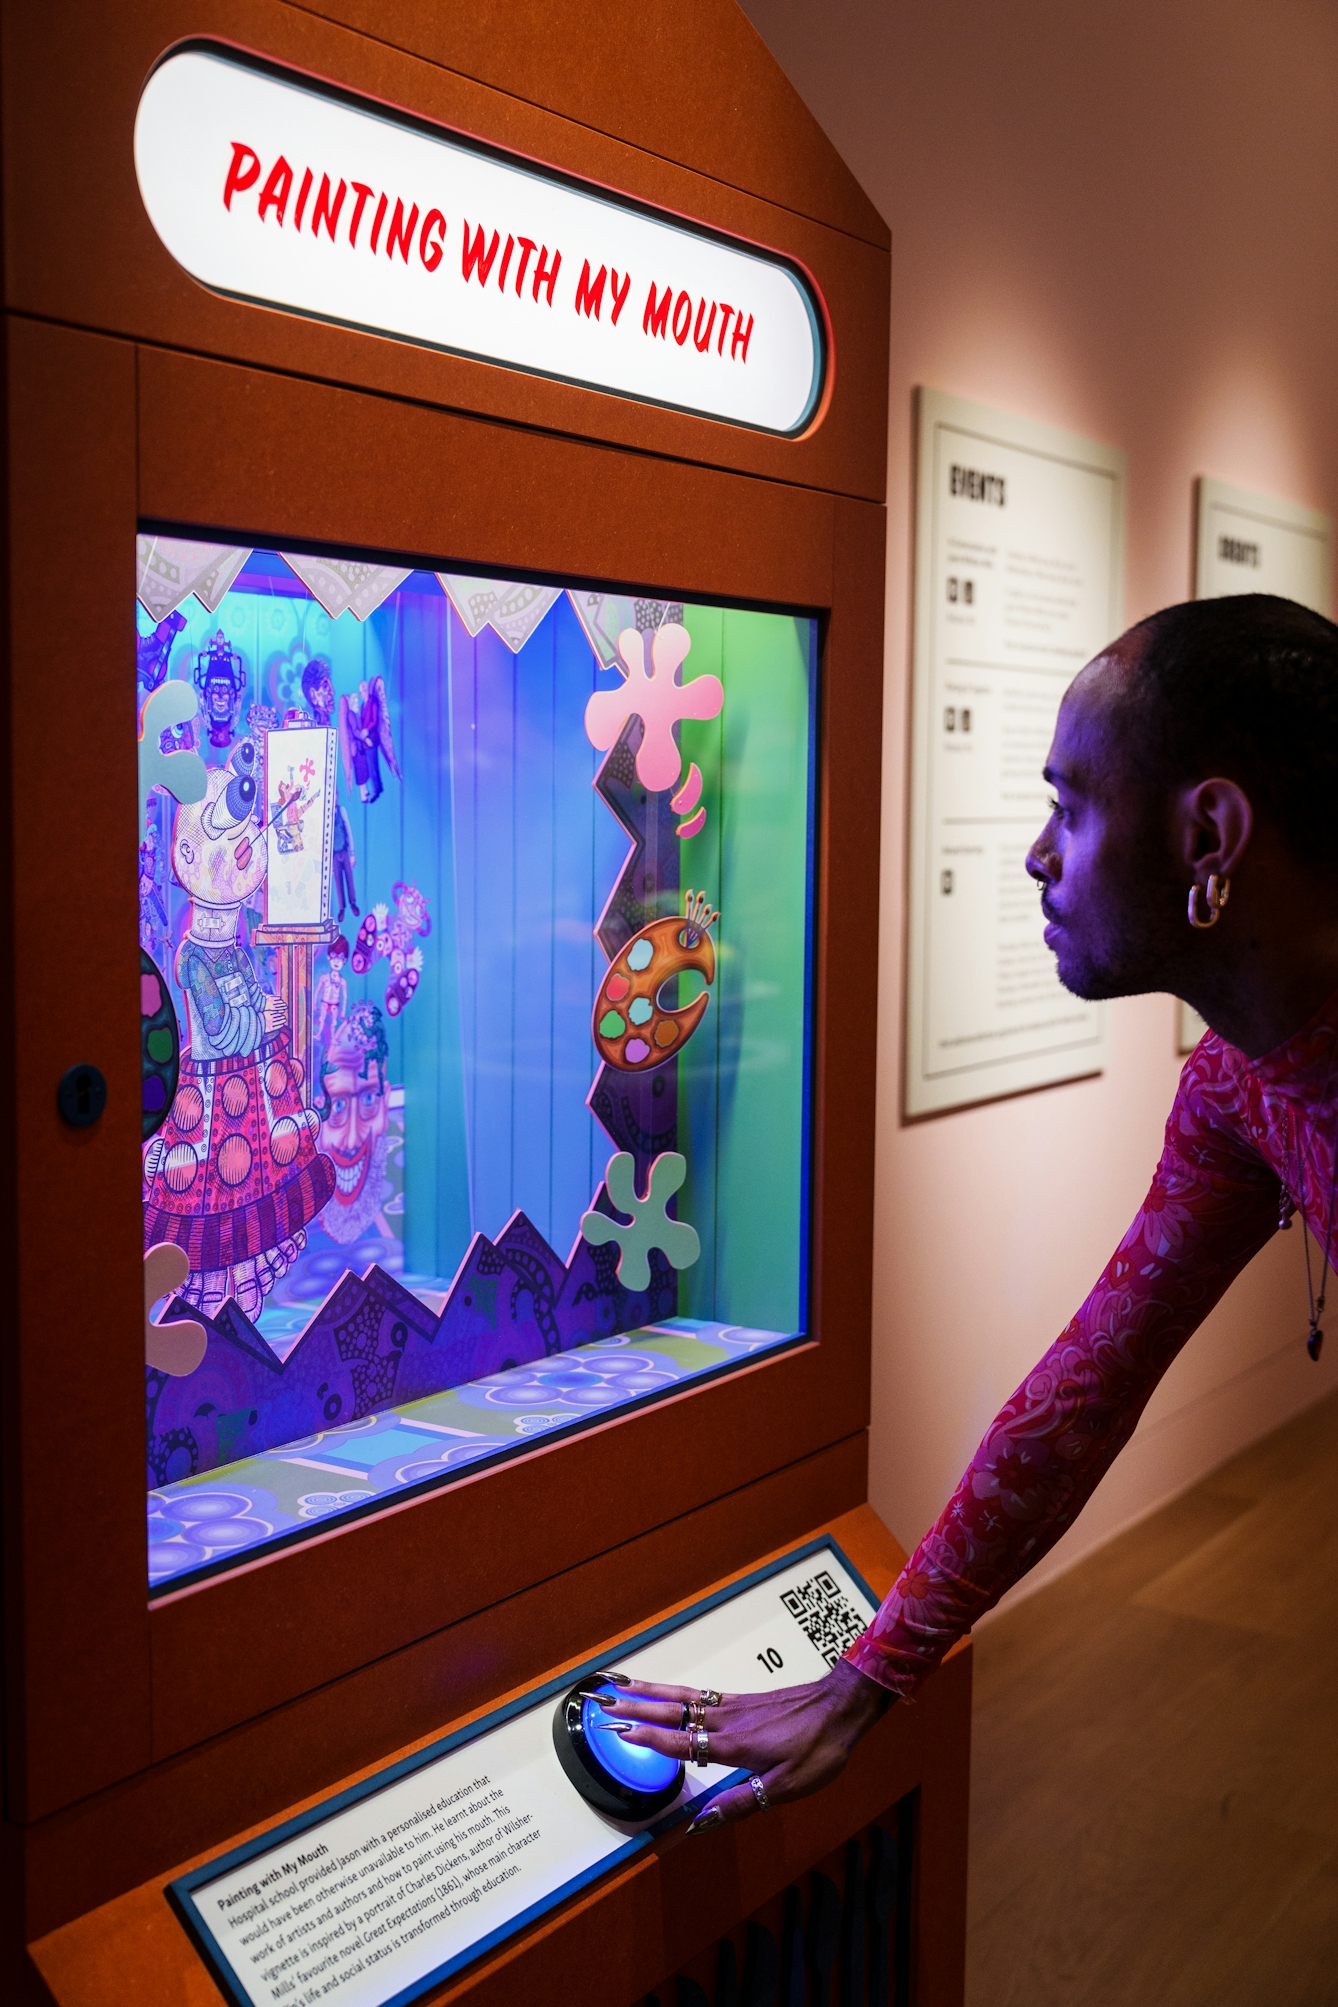 Photograph of a gallery visitor activating a large button on the front of an arcade style gaming machine. They are looking into a large glass fronted diorama, inside which is a multi-layered theatre style scene containing colourful drawings of characters and scenery.The backlit title of the diorama appears at the top of the booth and says 'Painting with my mouth'.